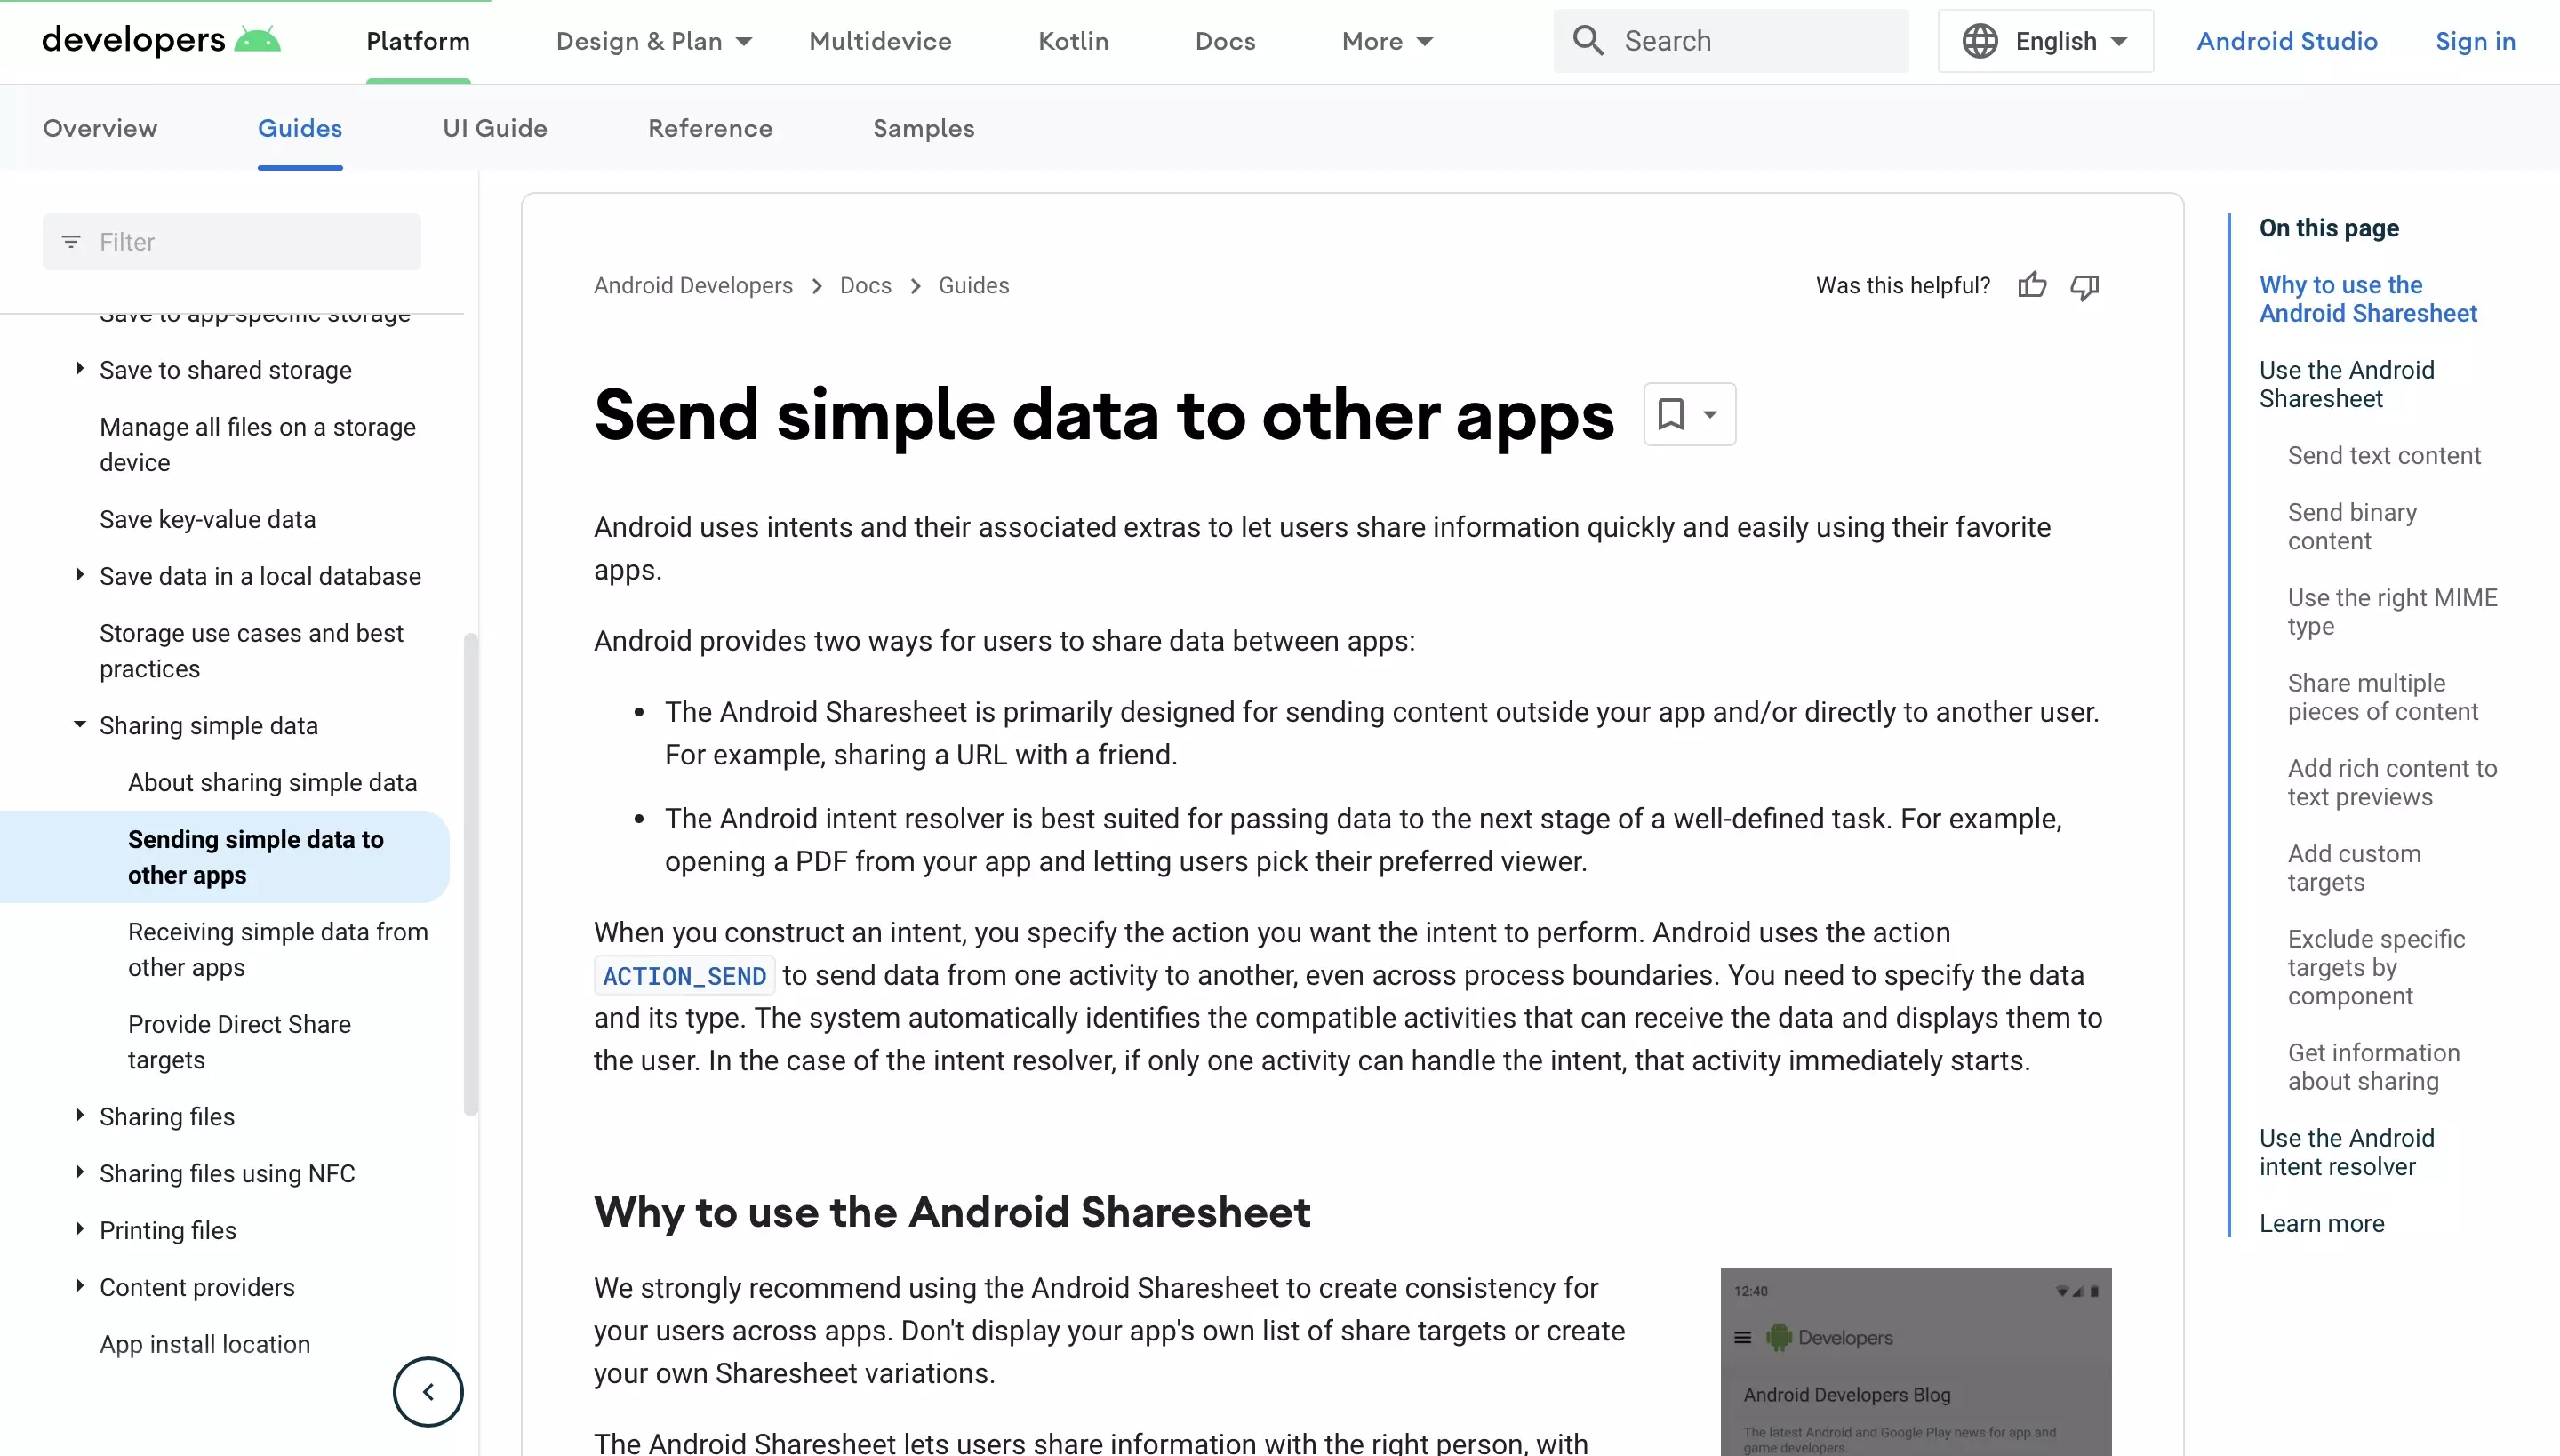 A screenshot of the Android Developer documentation on a page titled "Send simple data to other apps."